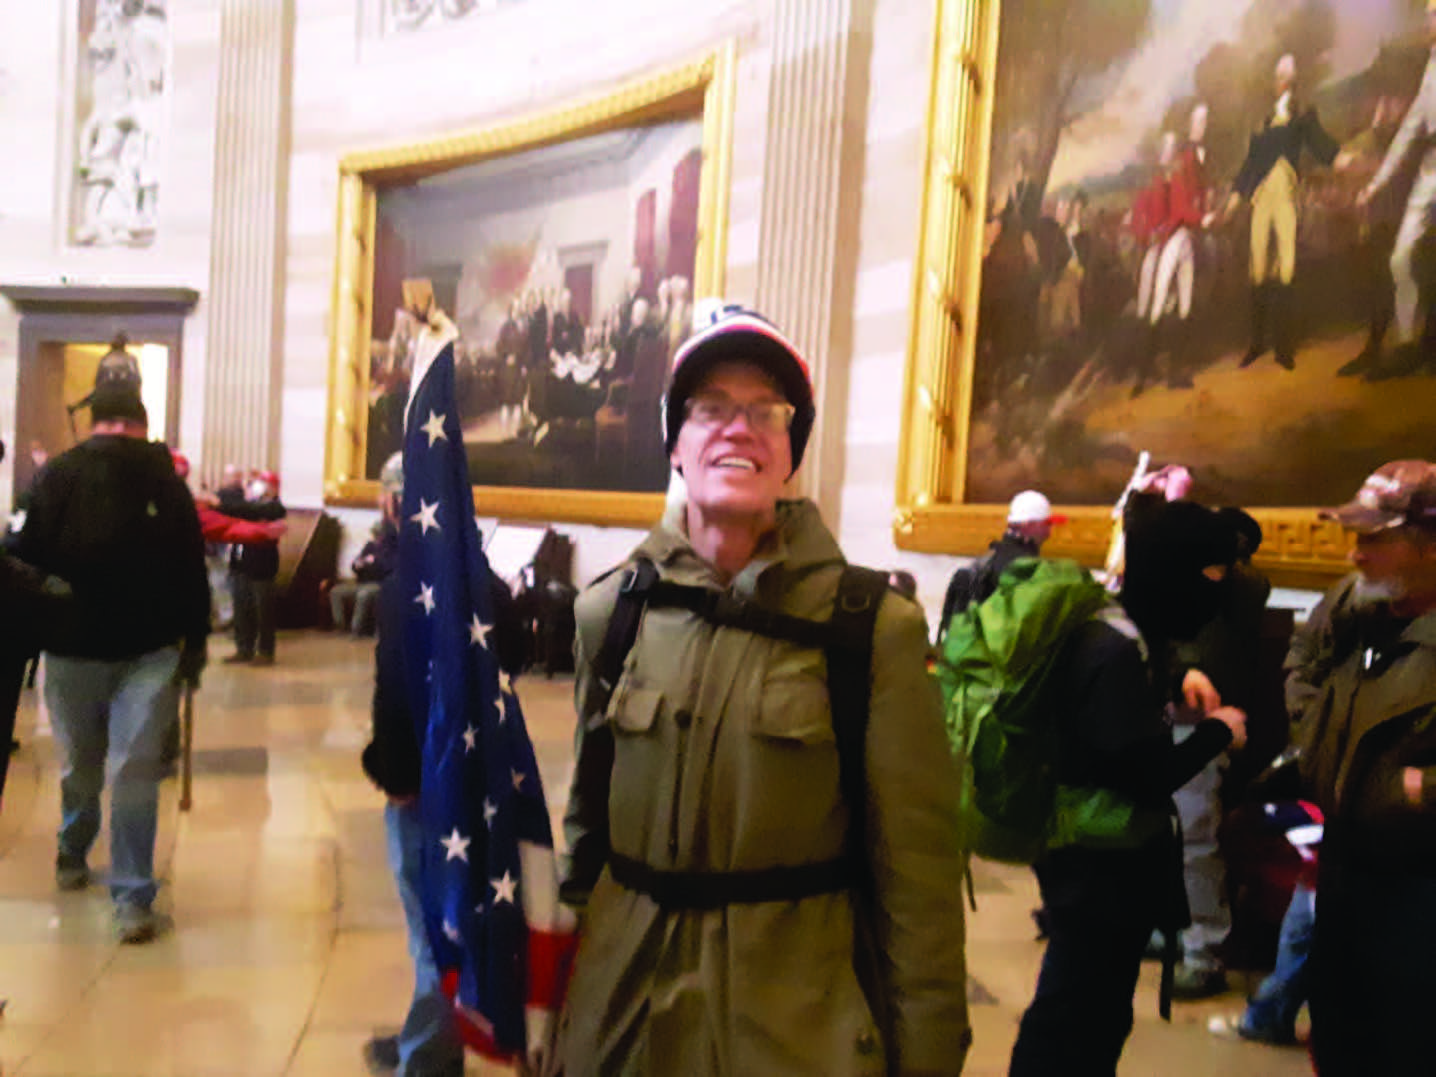 Kevin Loftus of Eau Claire posted to Facebook a photo of himself inside the U.S. Capitol during the insurrection of Jan. 6, 2021.